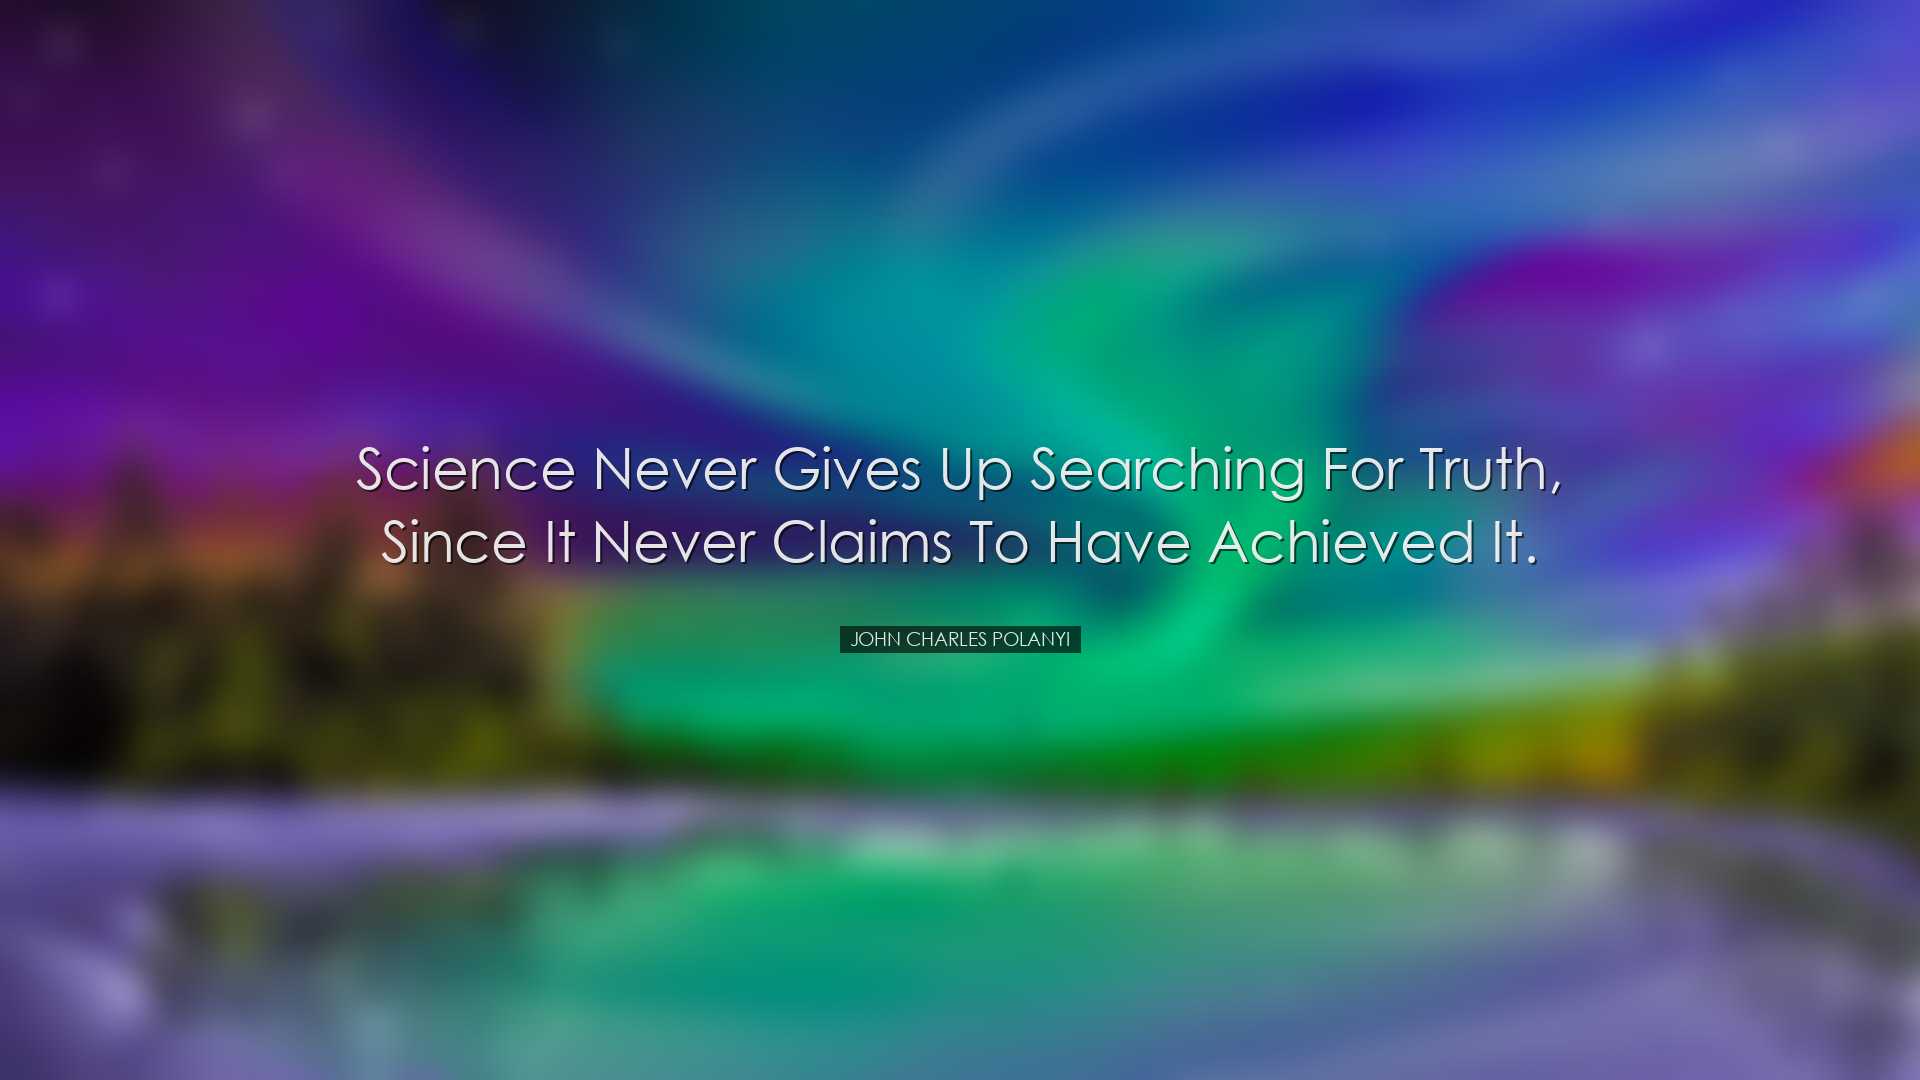 Science never gives up searching for truth, since it never claims